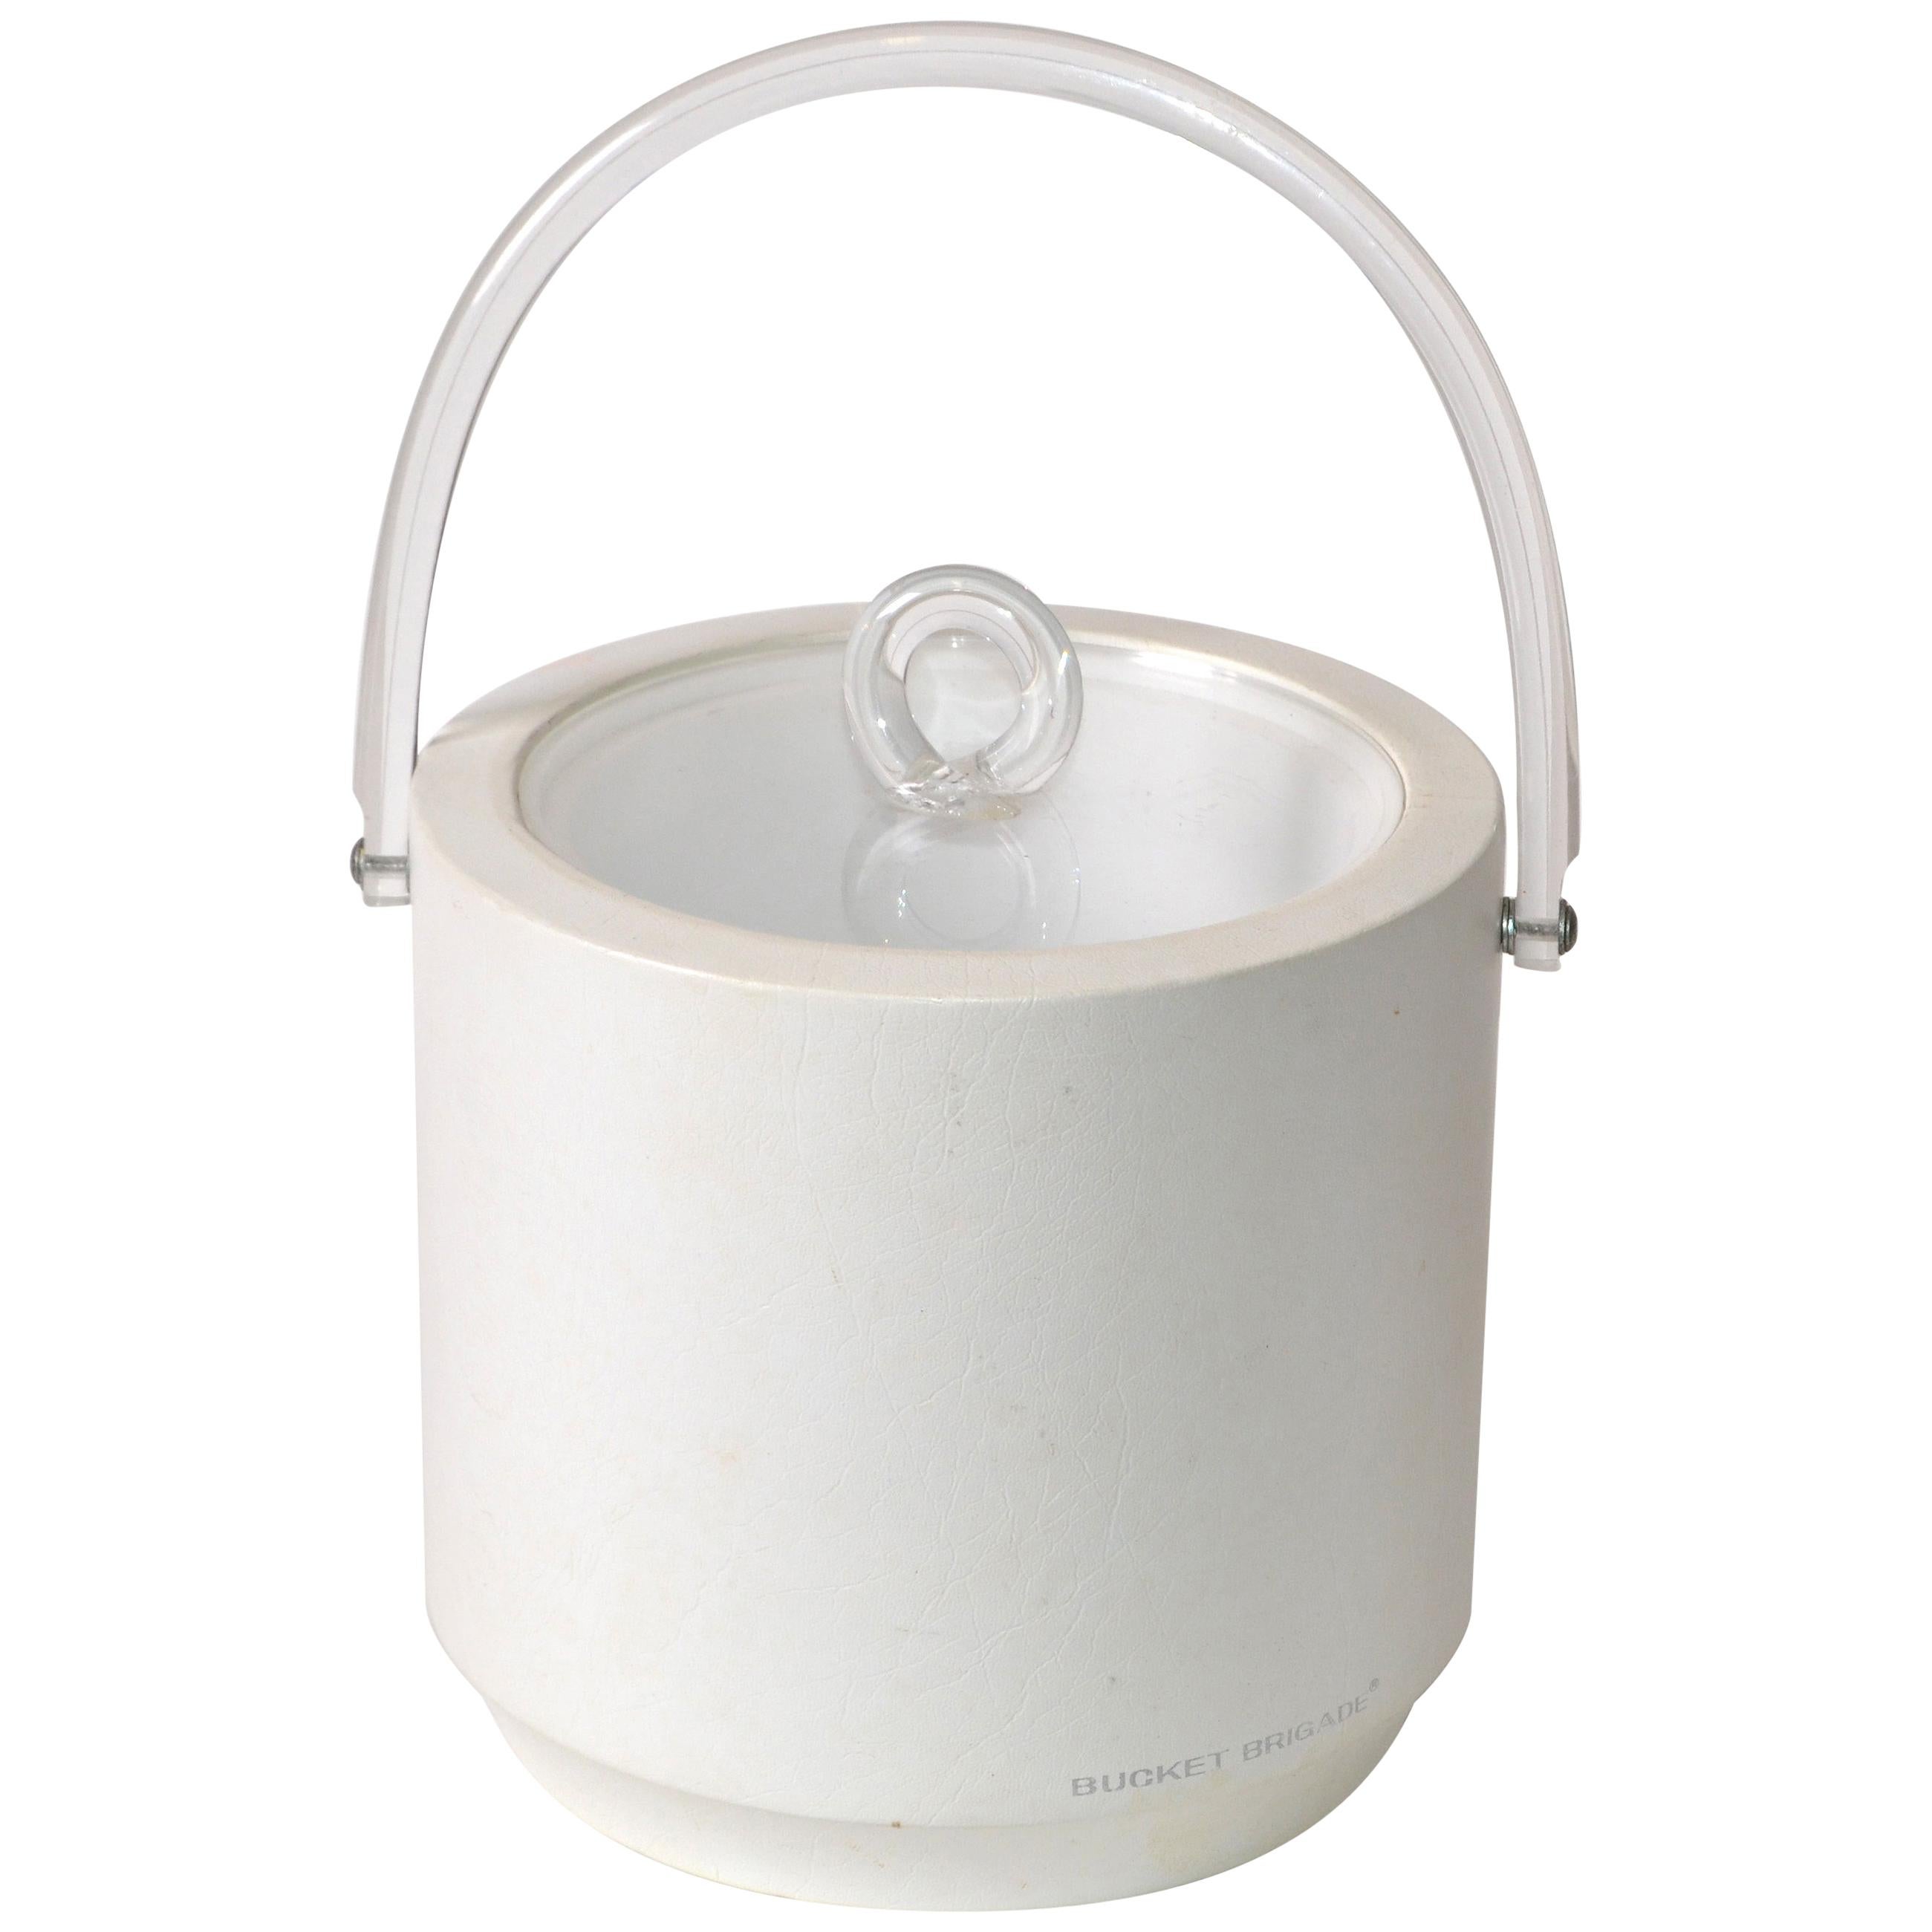 Bucket Brigade 1970 Mid-Century Modern White Leather & Lucite Lidded Ice Bucket For Sale